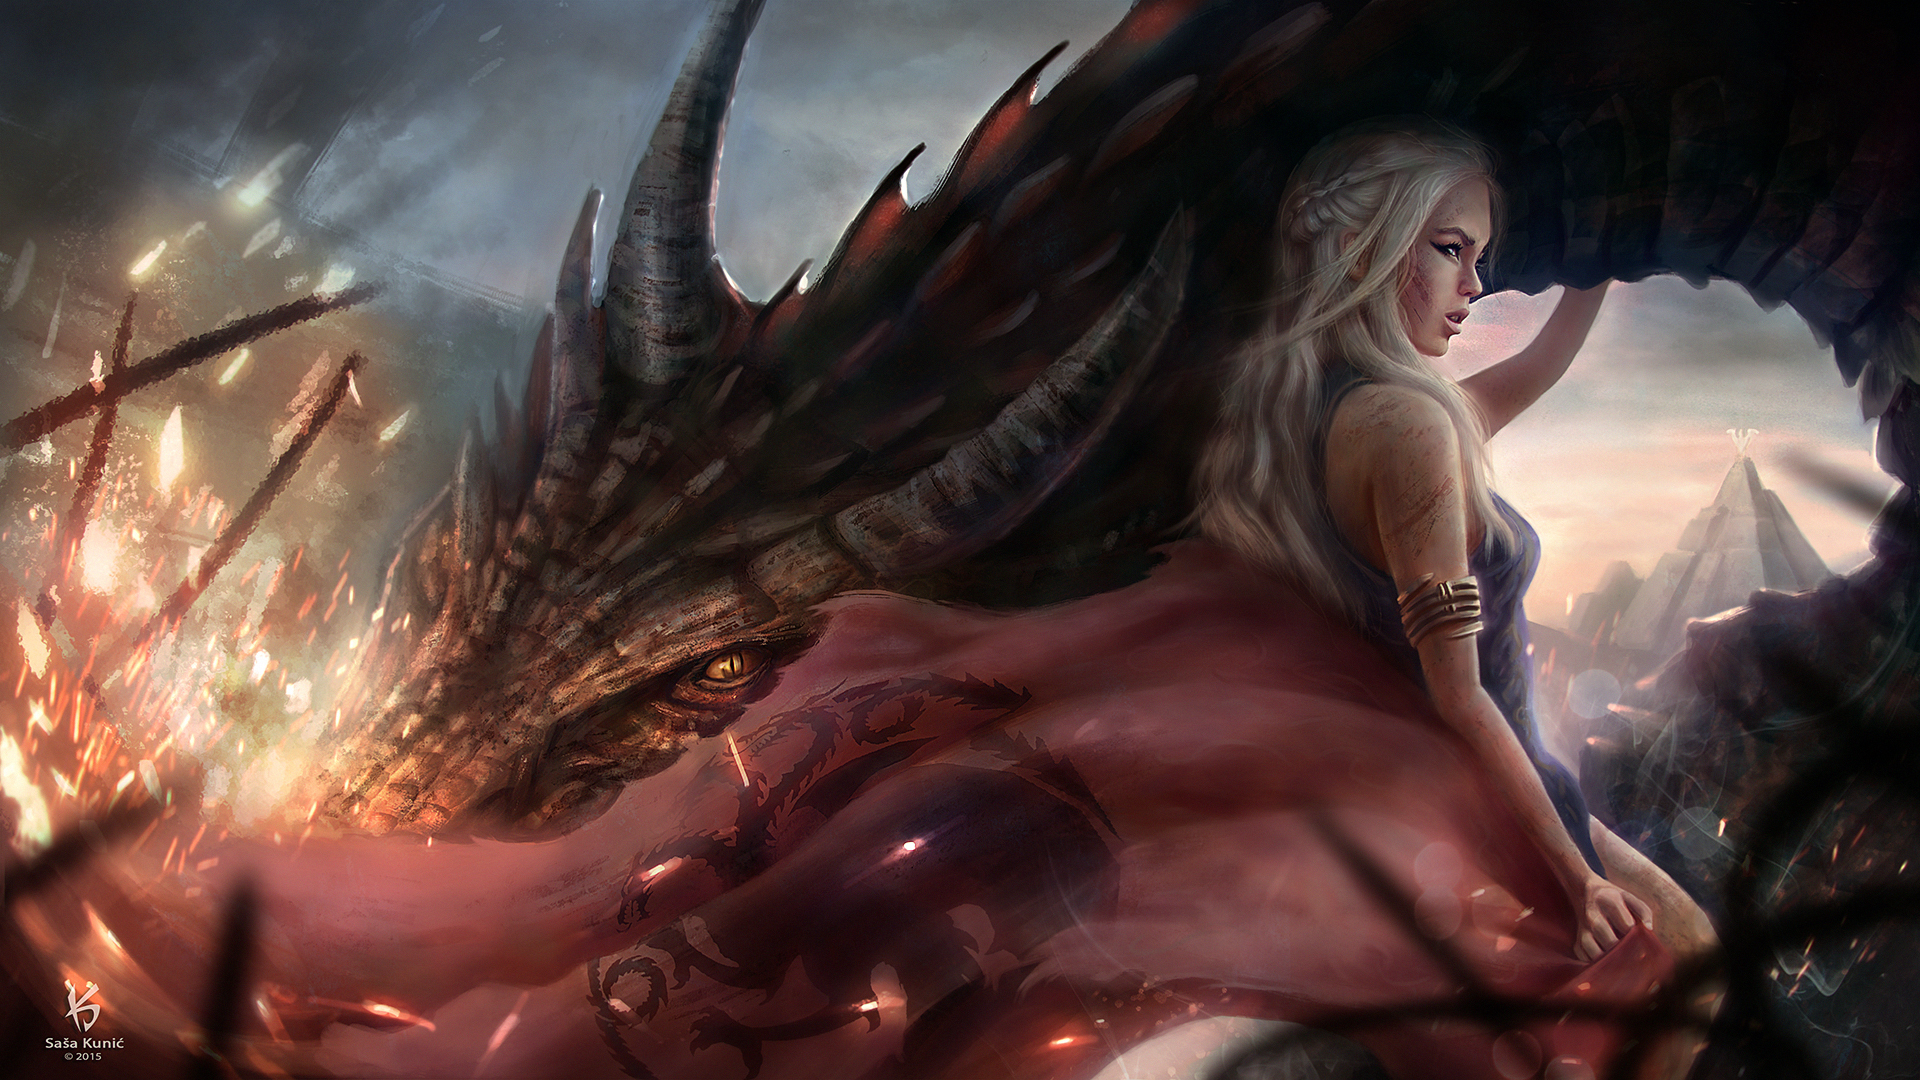 Download PC Wallpaper dragon, game of thrones, tv show, a song of ice and fire, daenerys targaryen